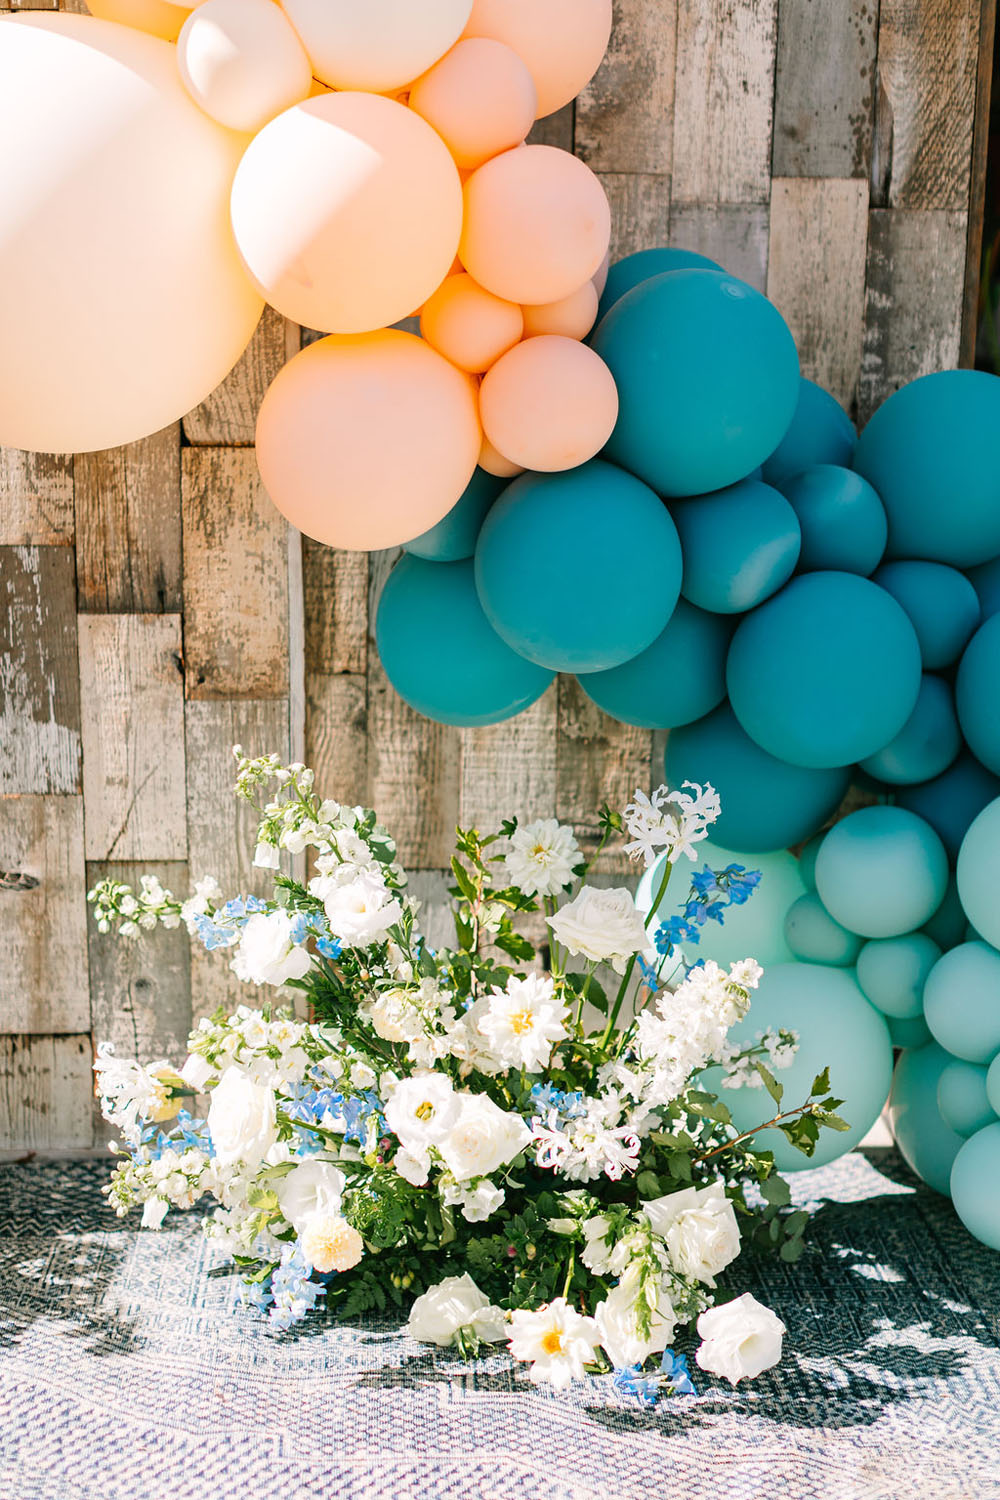 balloon install for baby shower